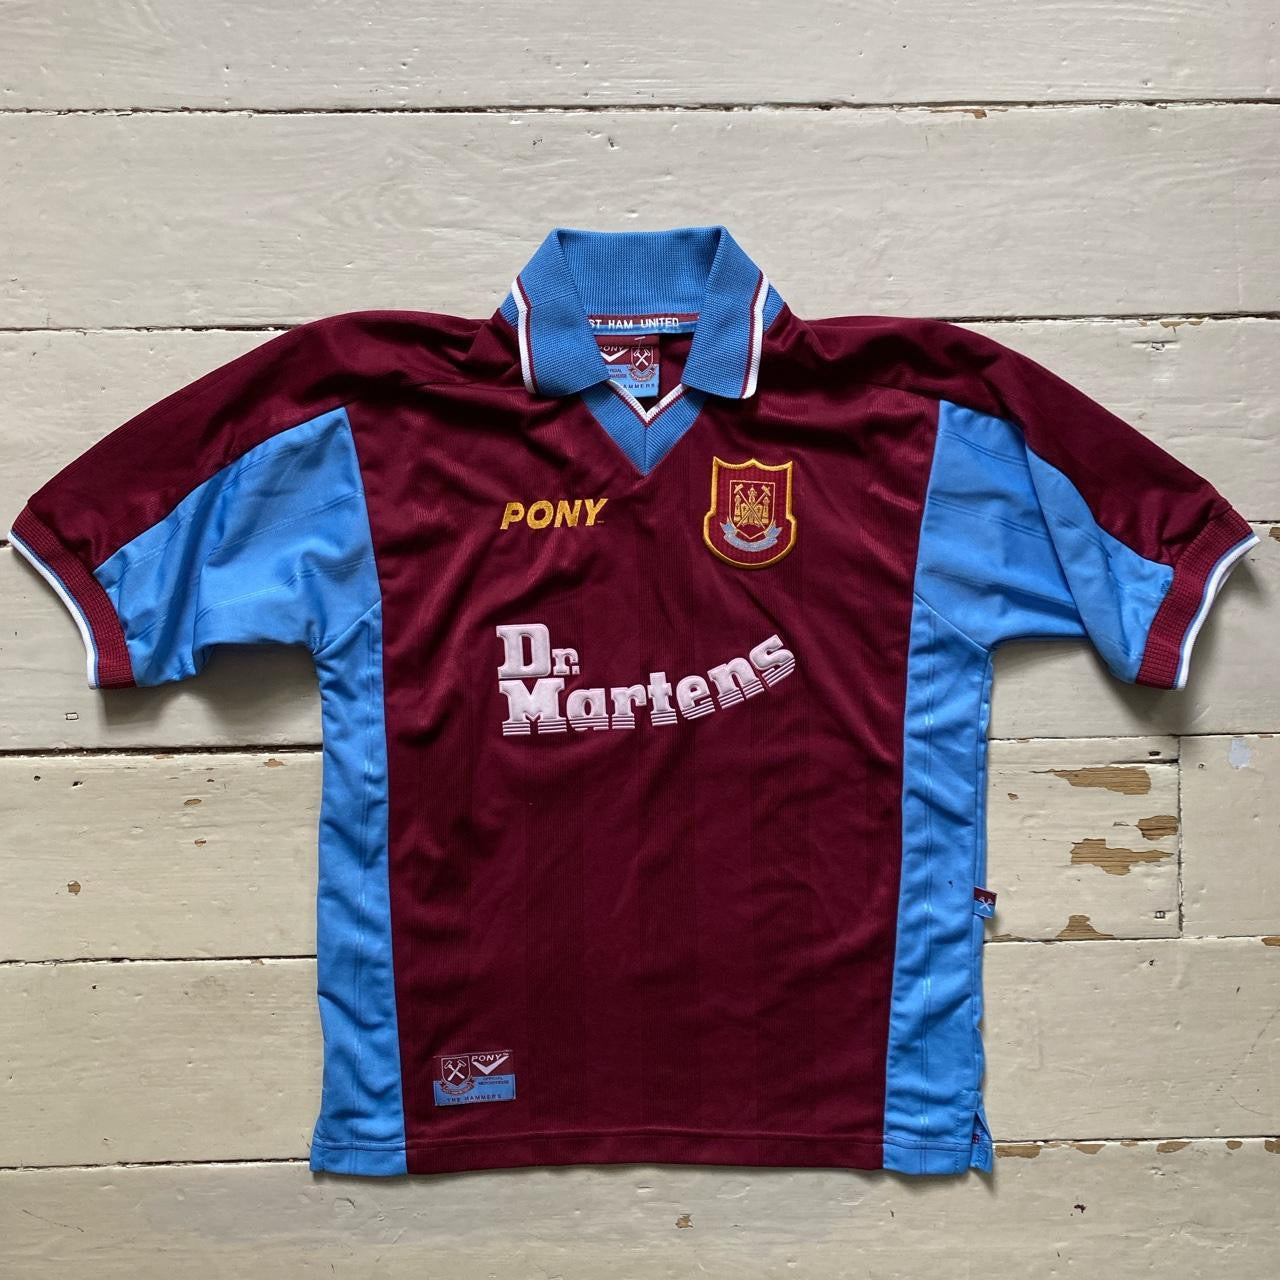 West Ham Dr Martens Pony Jersey (Small)